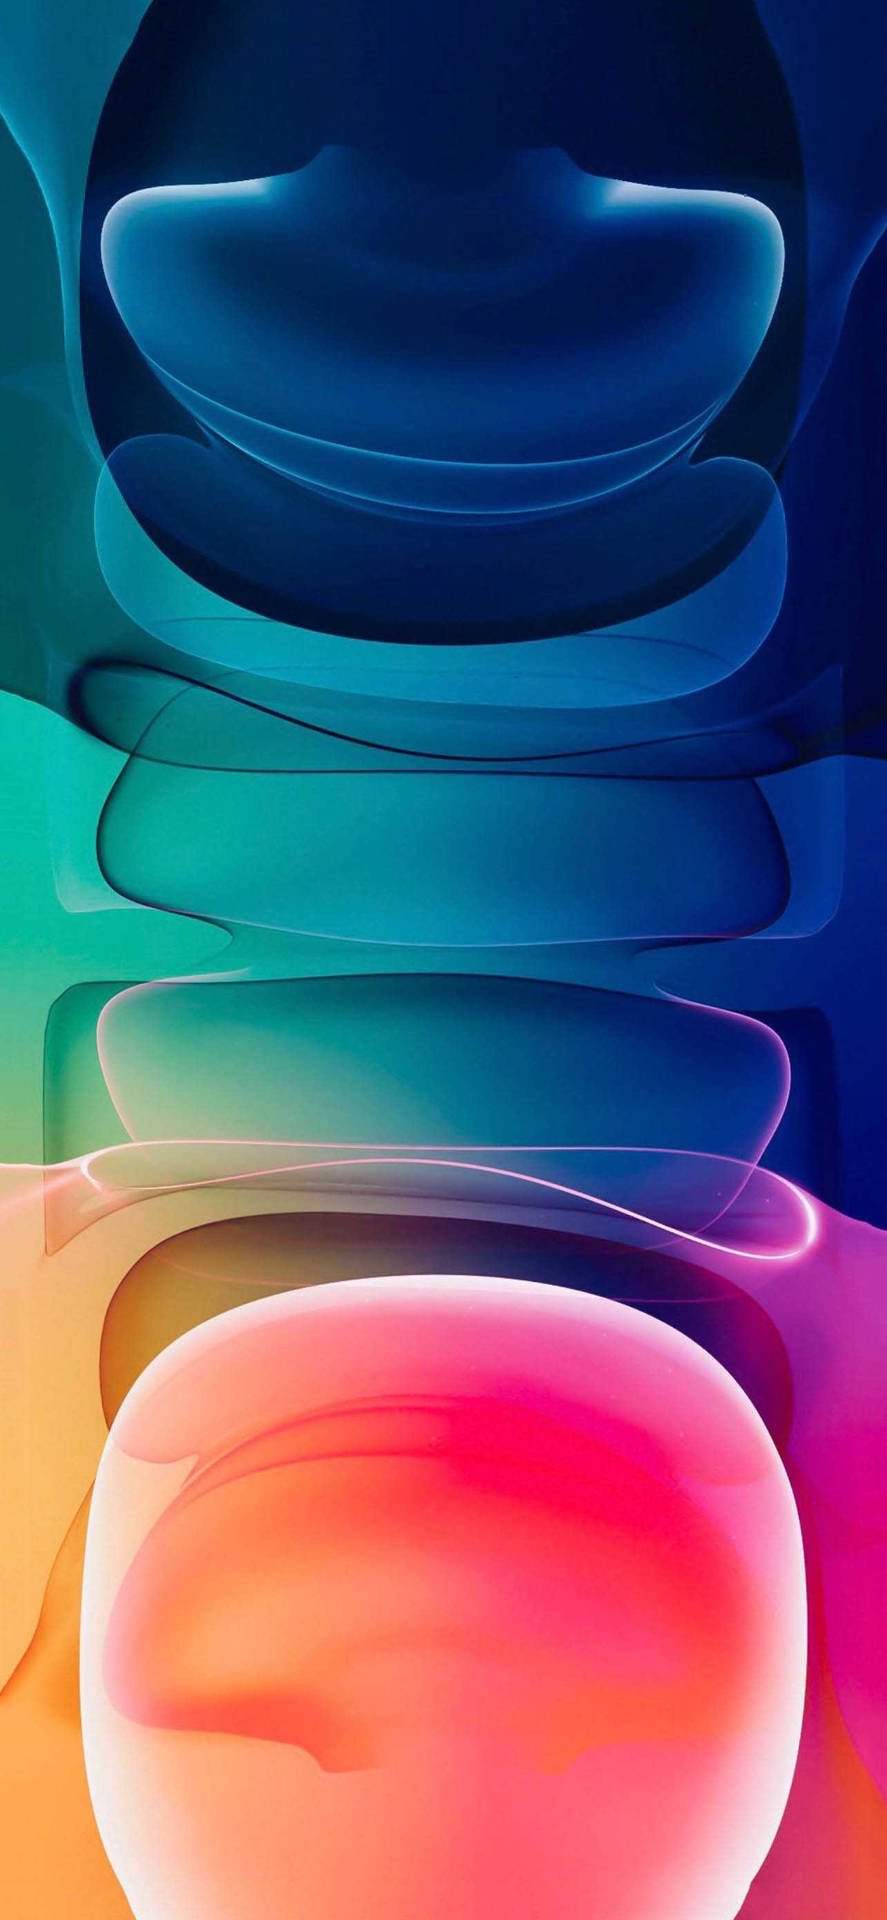 Download Ios 15 Abstract Spheres Wallpapers